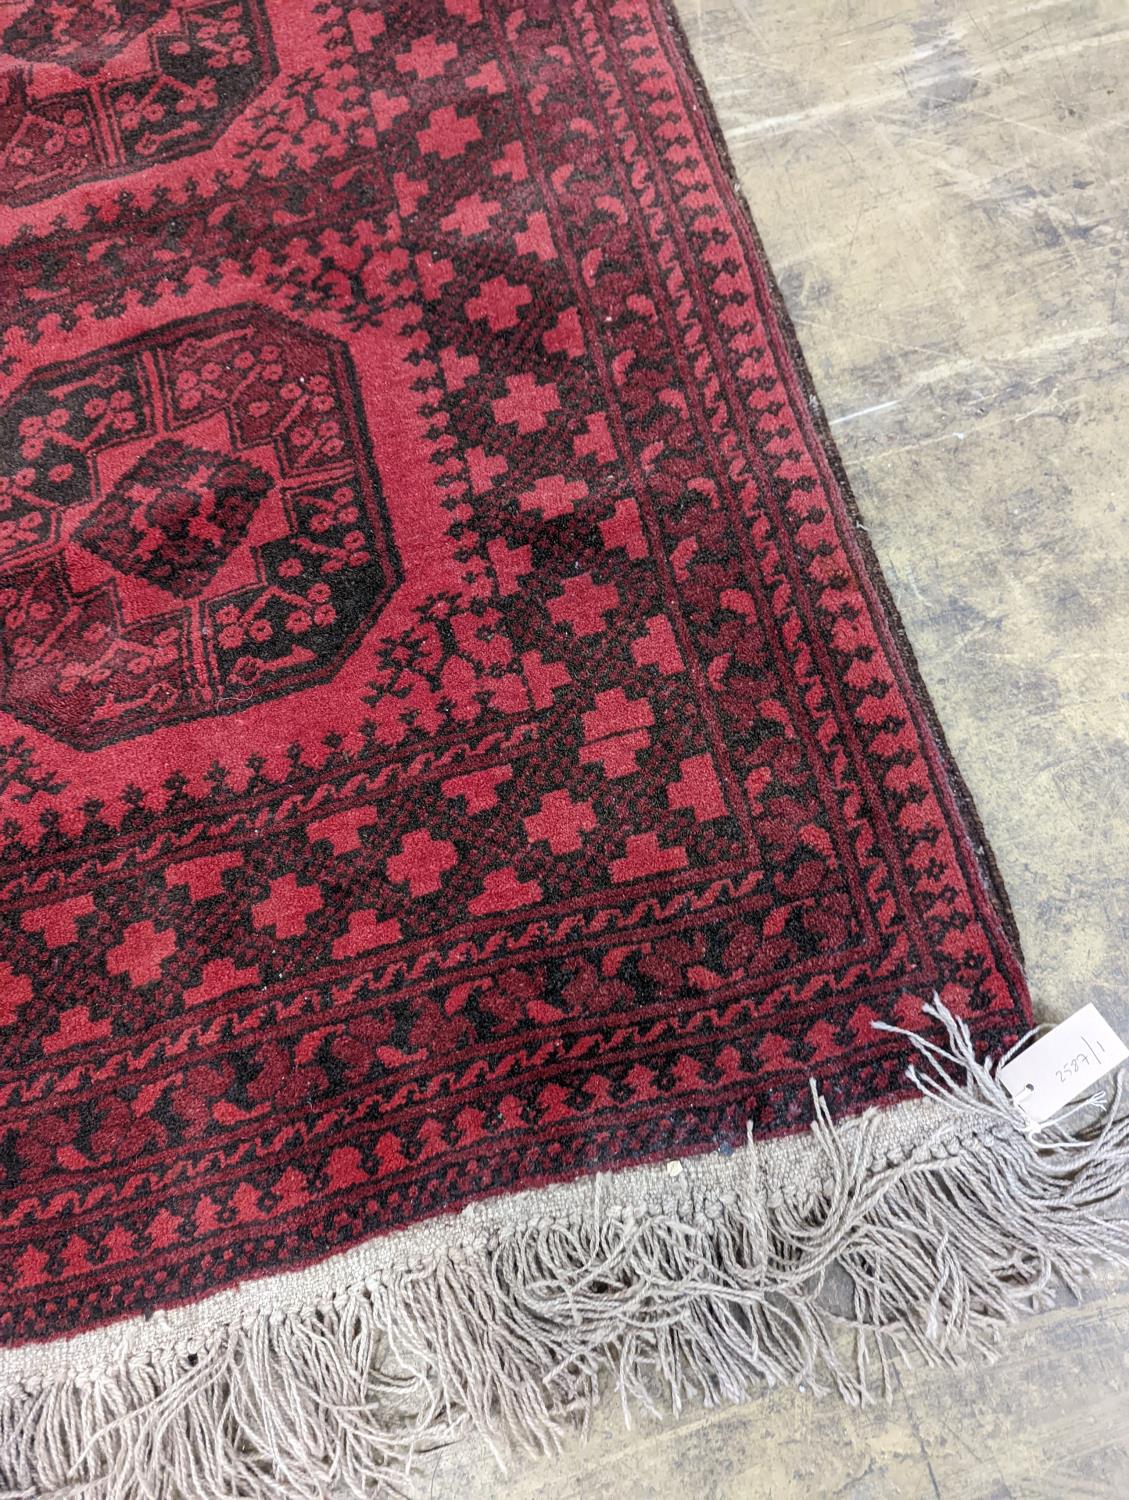 An Afghan red ground rug, 140 x 96cm - Image 2 of 4